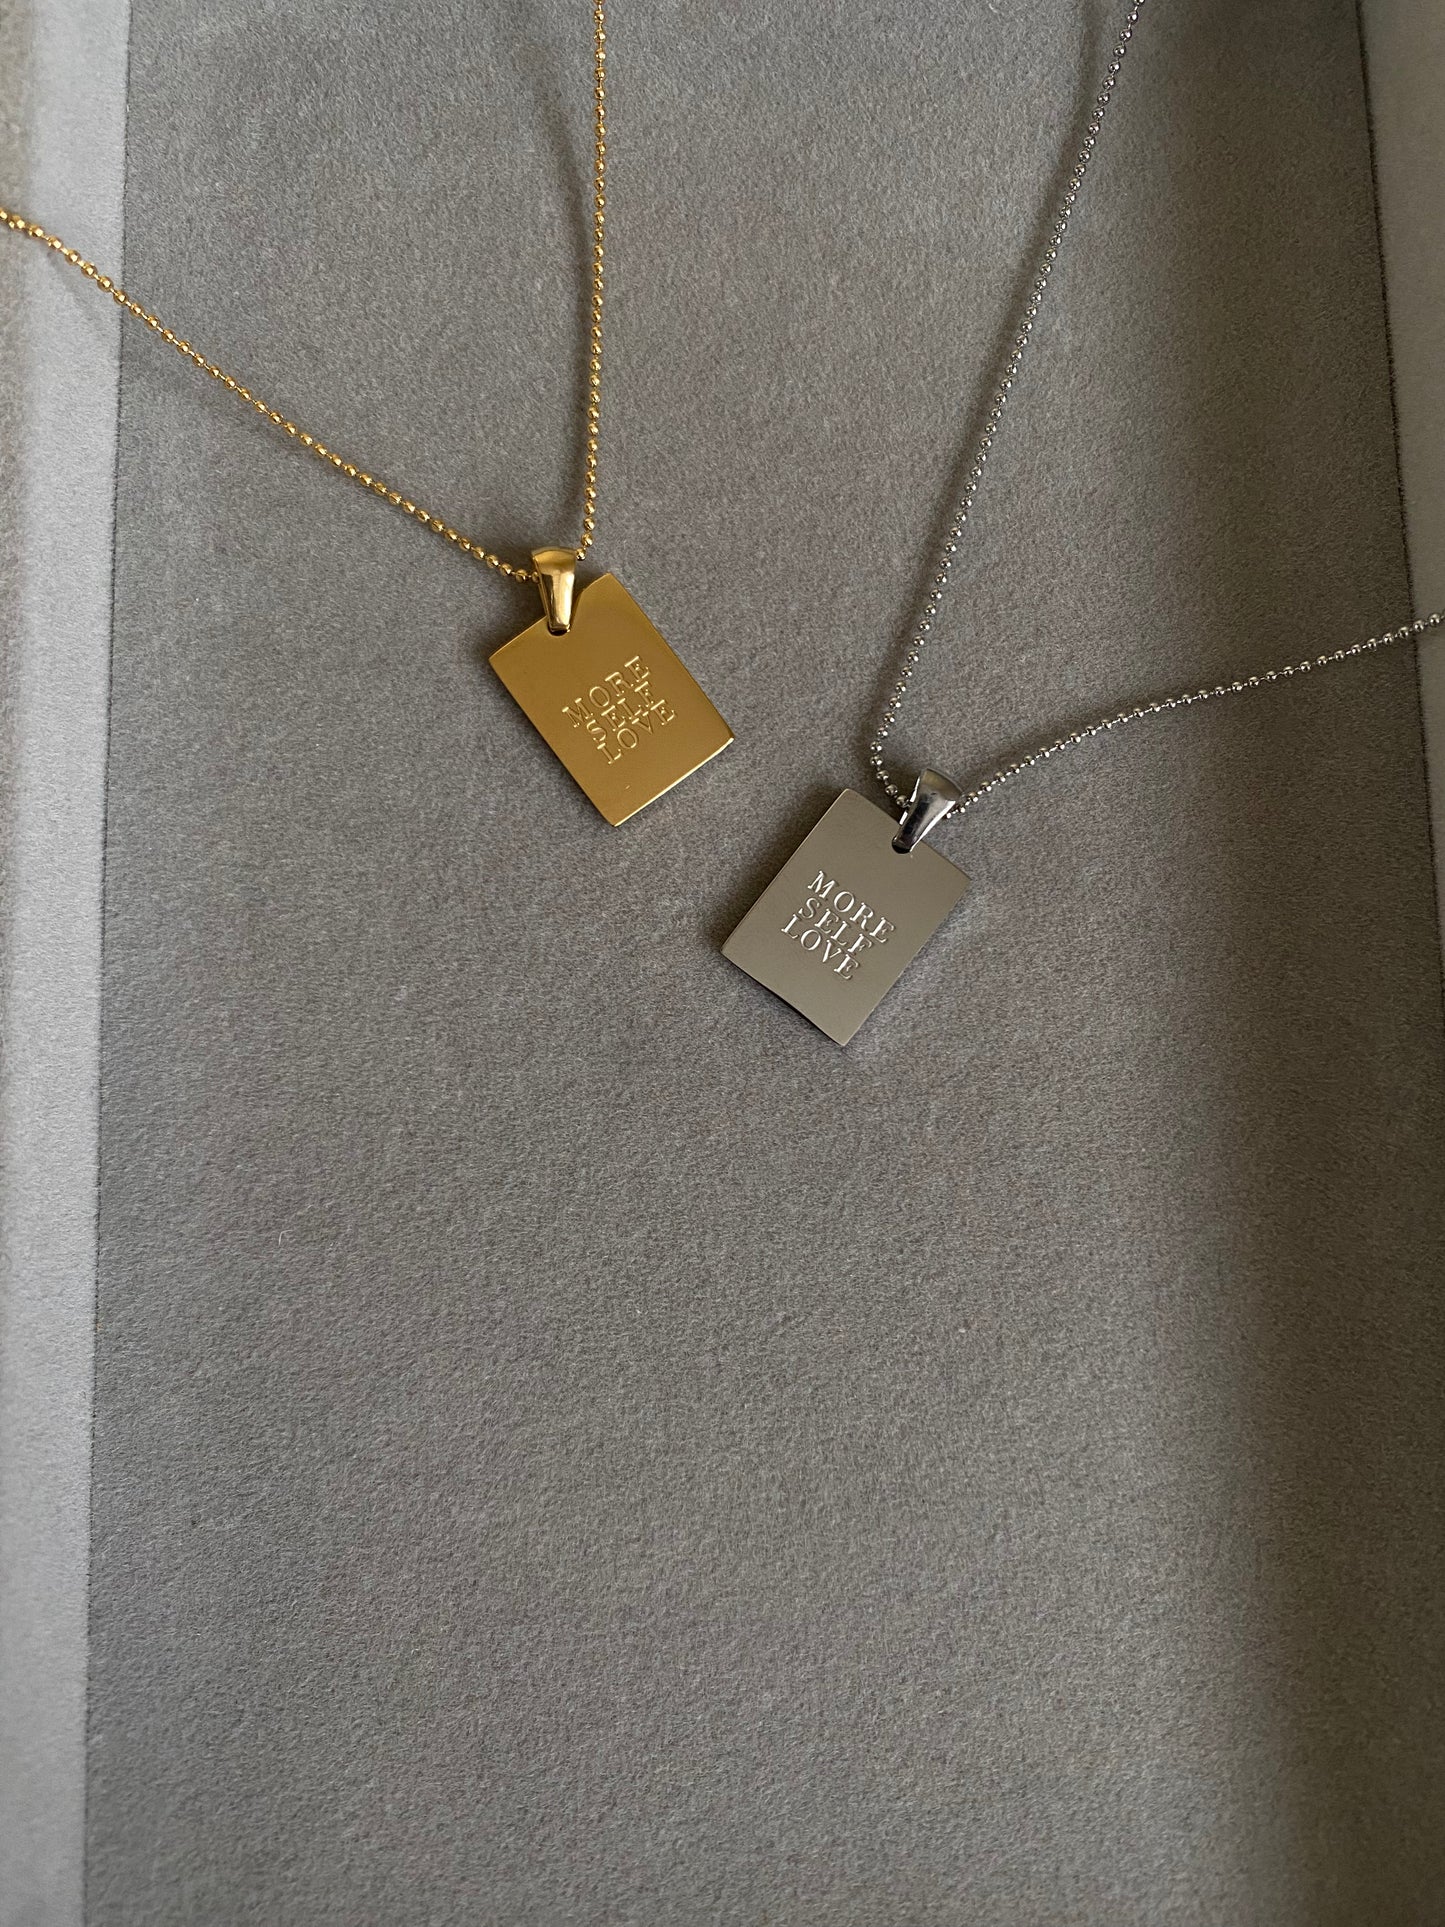 More Self Love 18K Gold Necklace